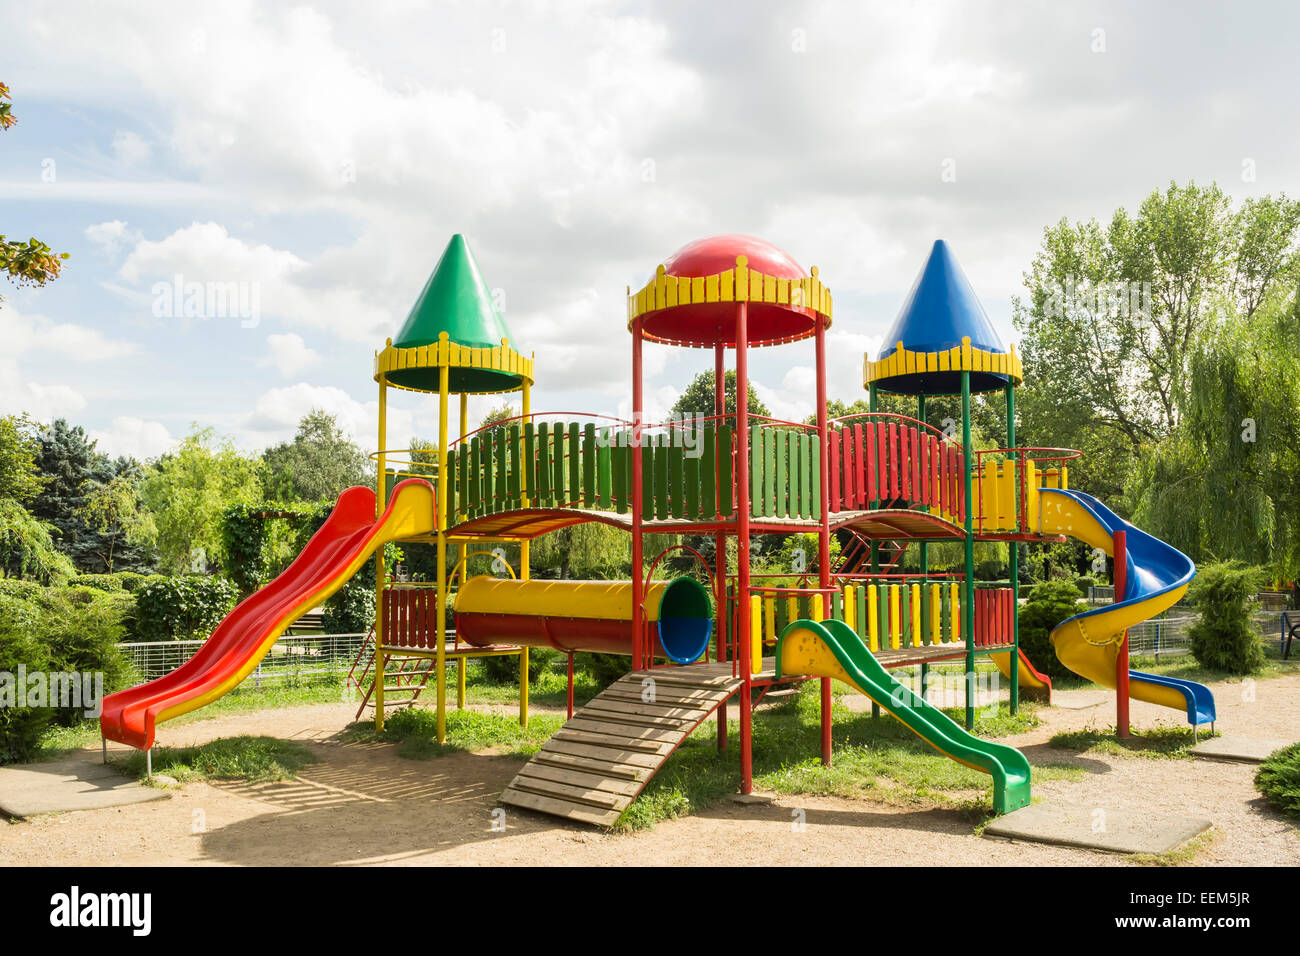 Colorful children playground with castle like construction and playing equipment Stock Photo